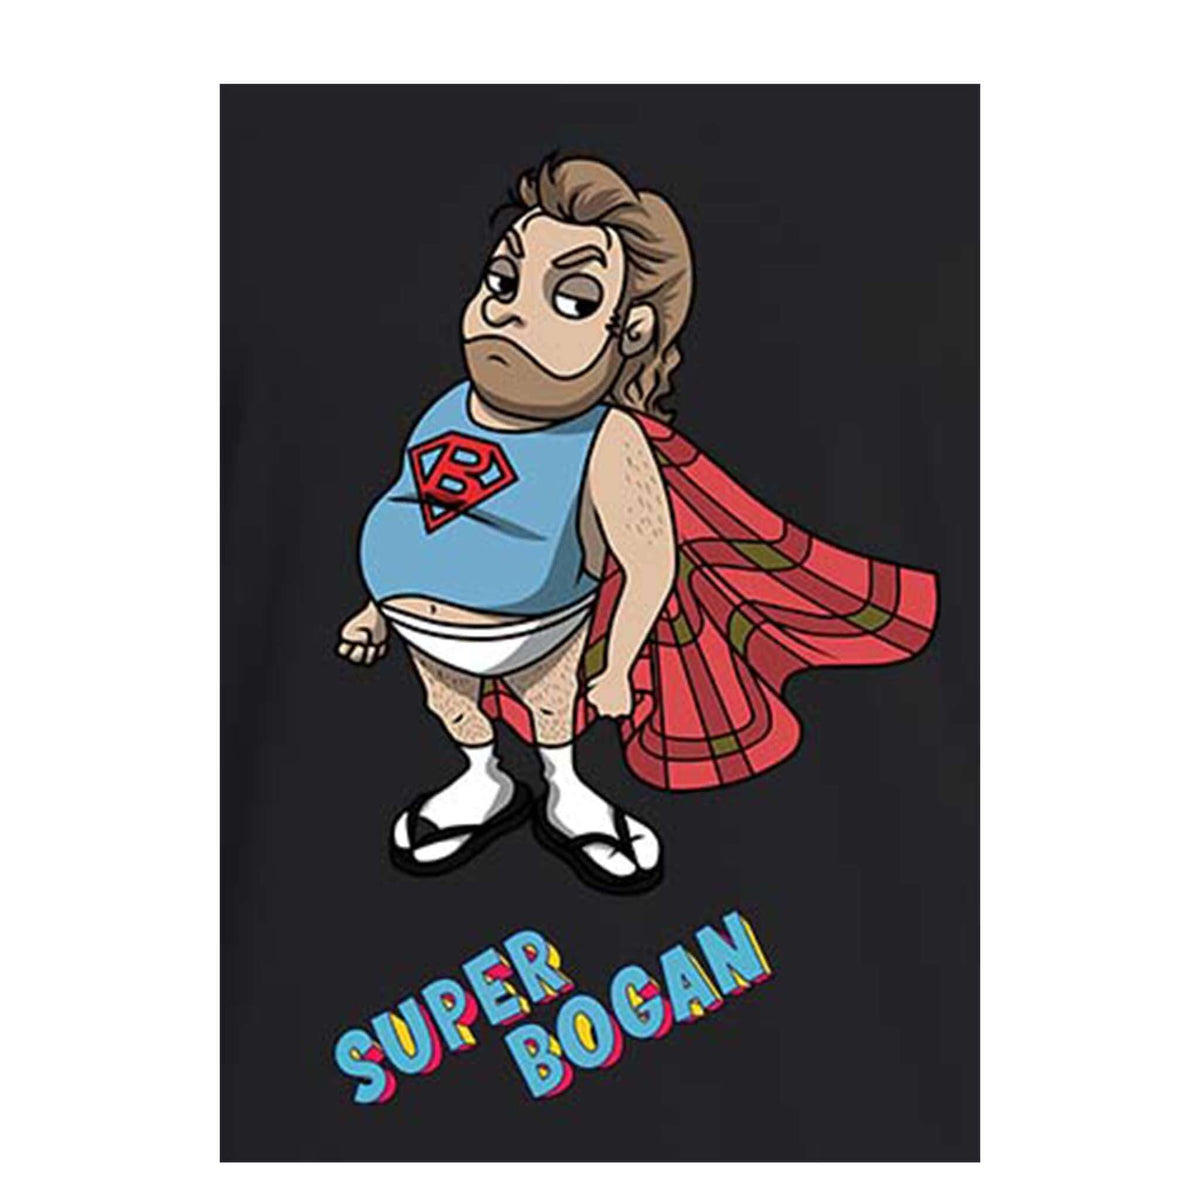 Super Bogan has beer gut and wears thongs with sandals